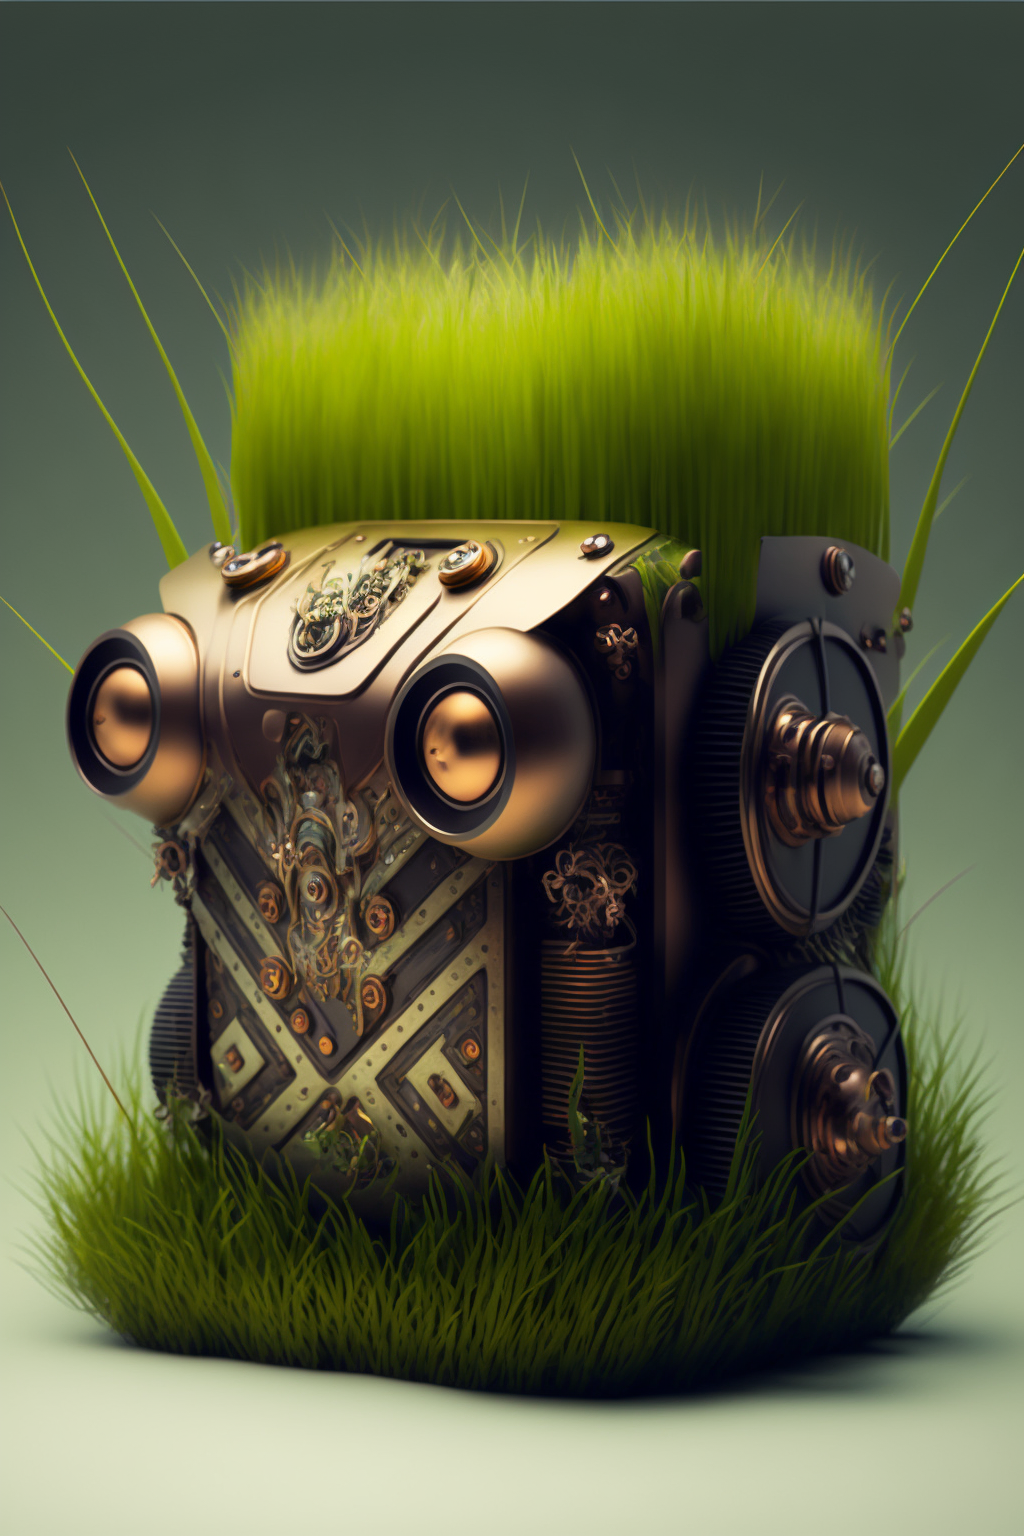 Grass in the style of Robotique-Baroque 8